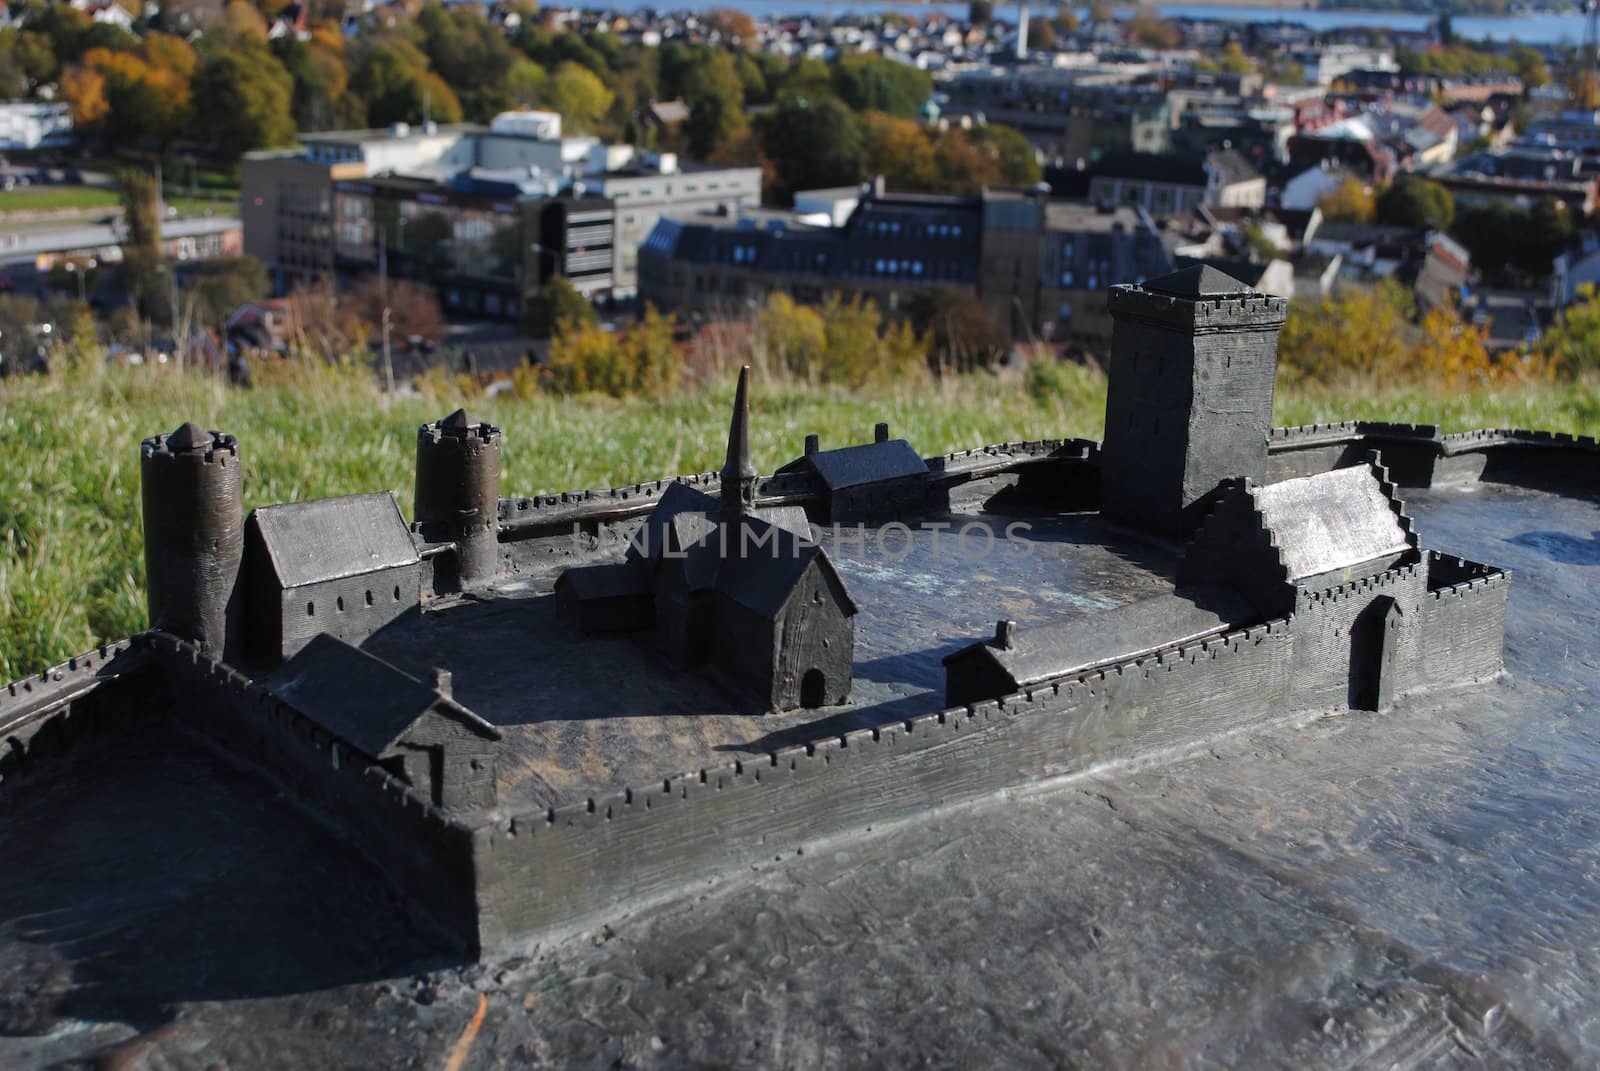 An outdoor bronze model of Tønsberg Fortress (Tunsberg festning), a medieval fortress, located in Tønsberg, Norway which was defended by the fortress for over 300 years.